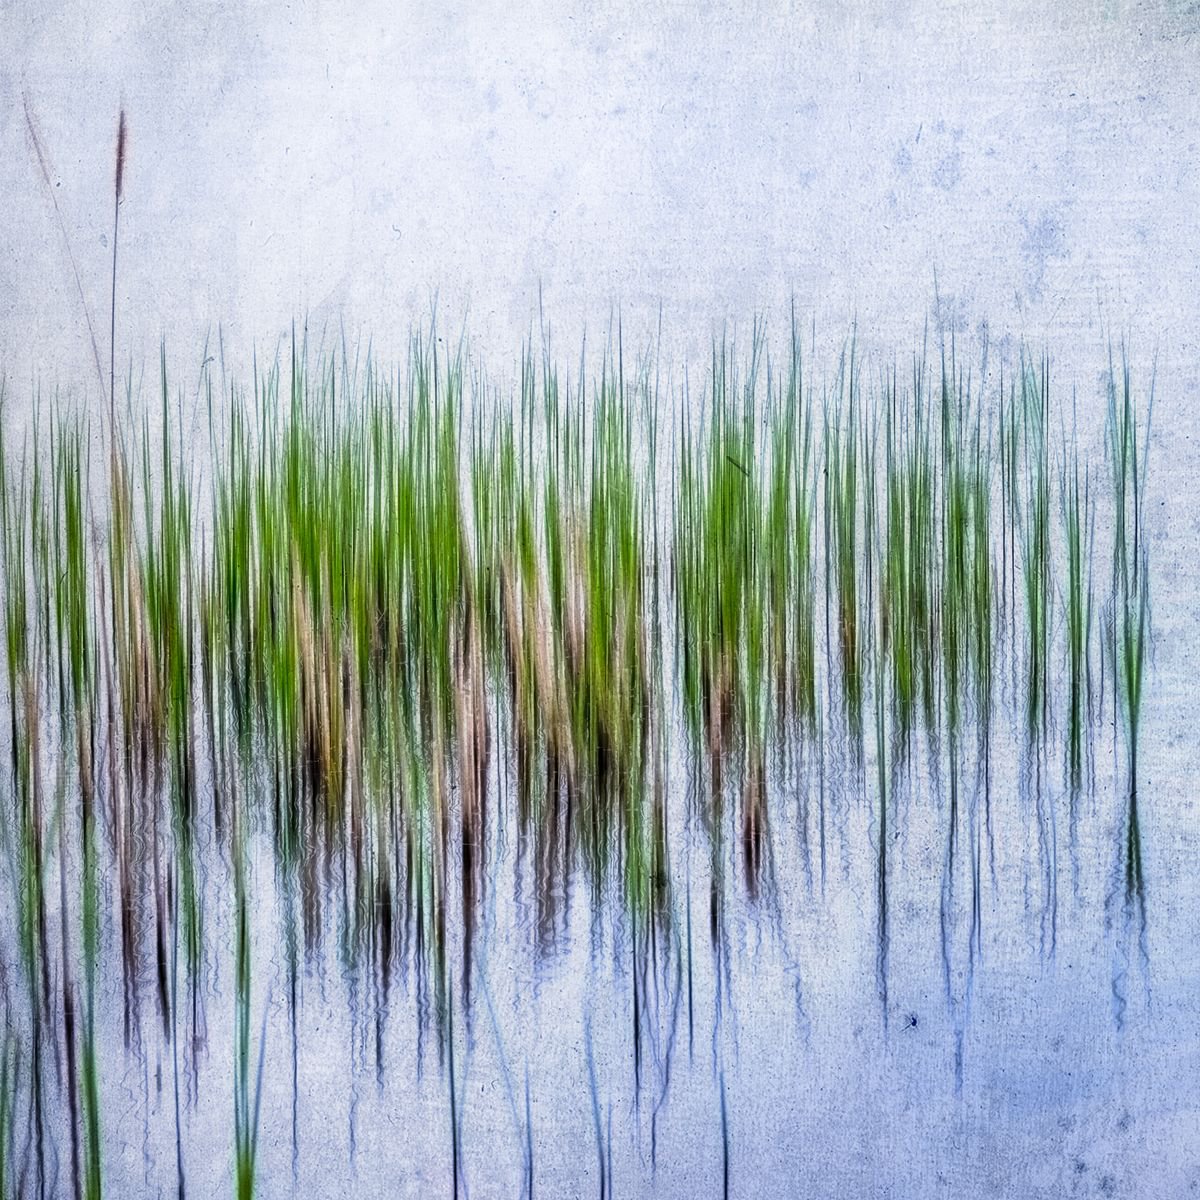 Reeds #1 Limited Edition 1/50 10x10 inch Photographic Print. by Graham Briggs